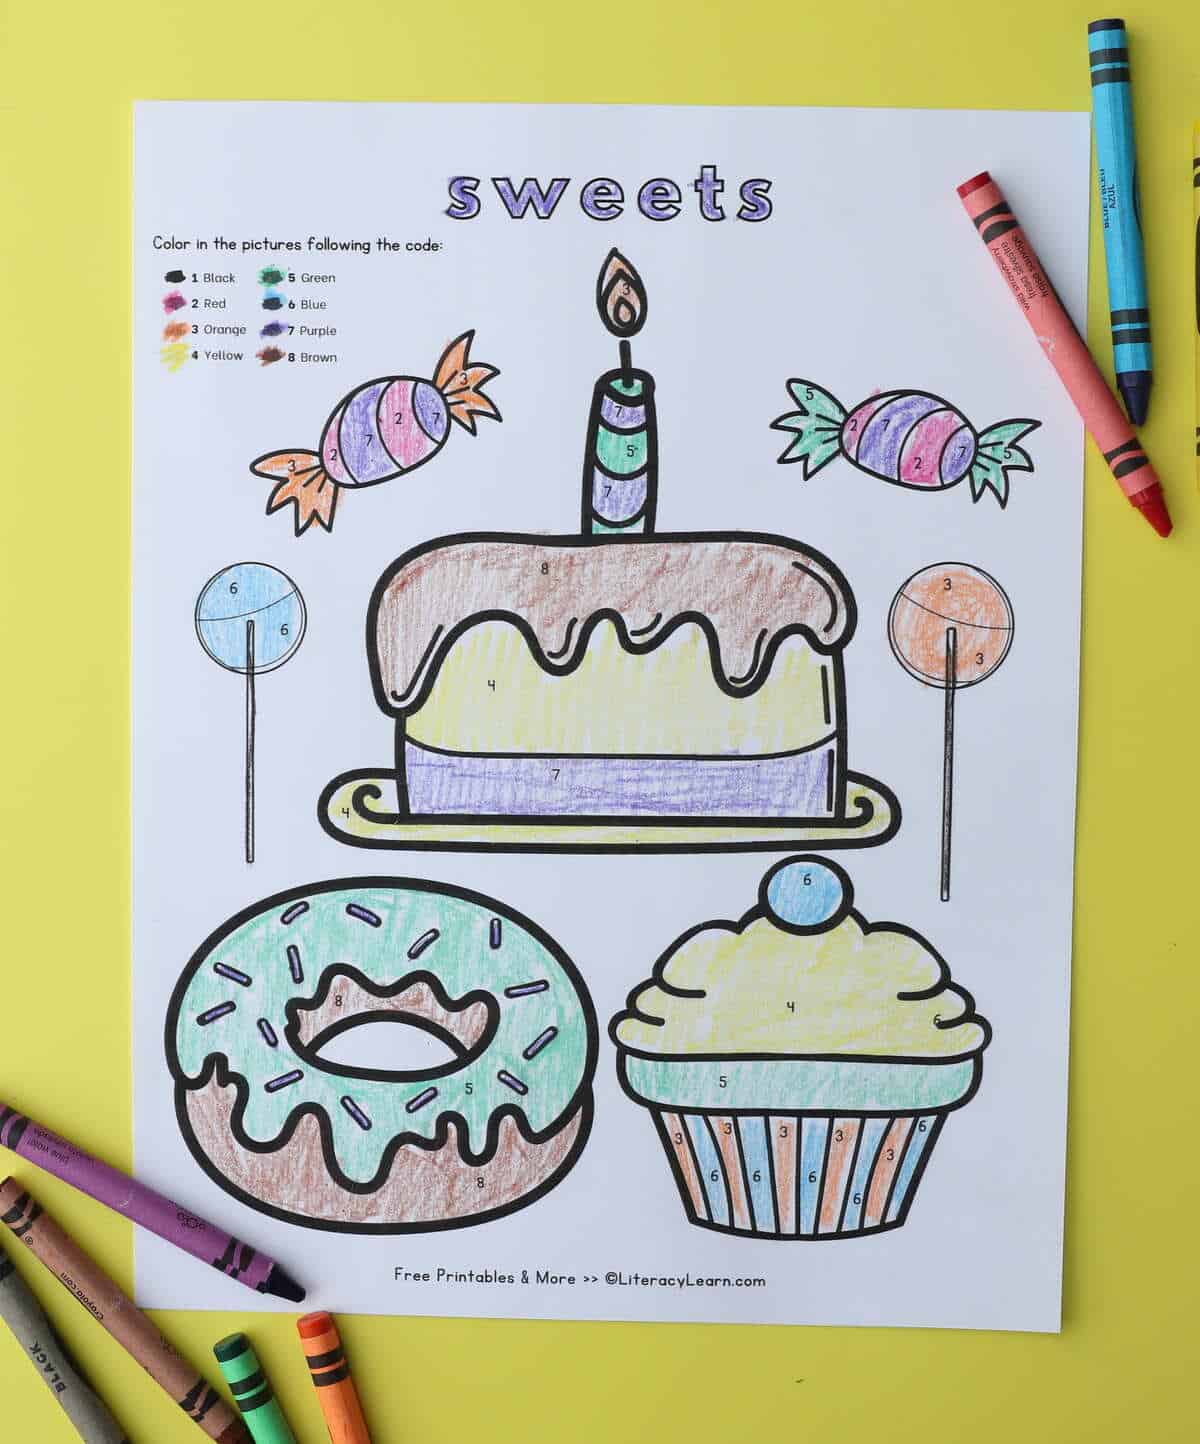 A printed sweets and desserts category coloring page with cake, donuts, candy, and a cupcake. 